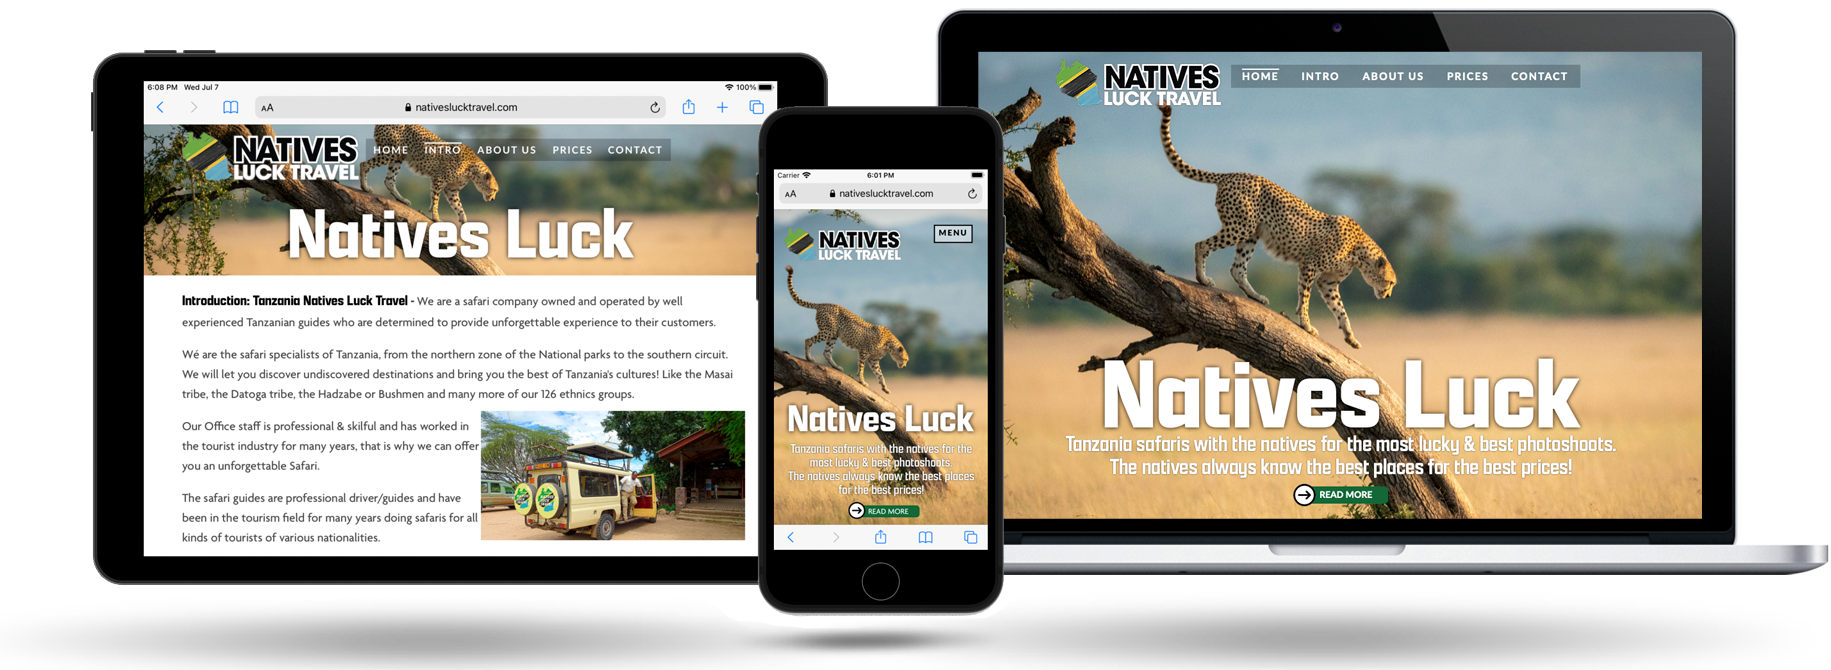 Webdesign Holland voor Natives Luck Travel in Tanzania